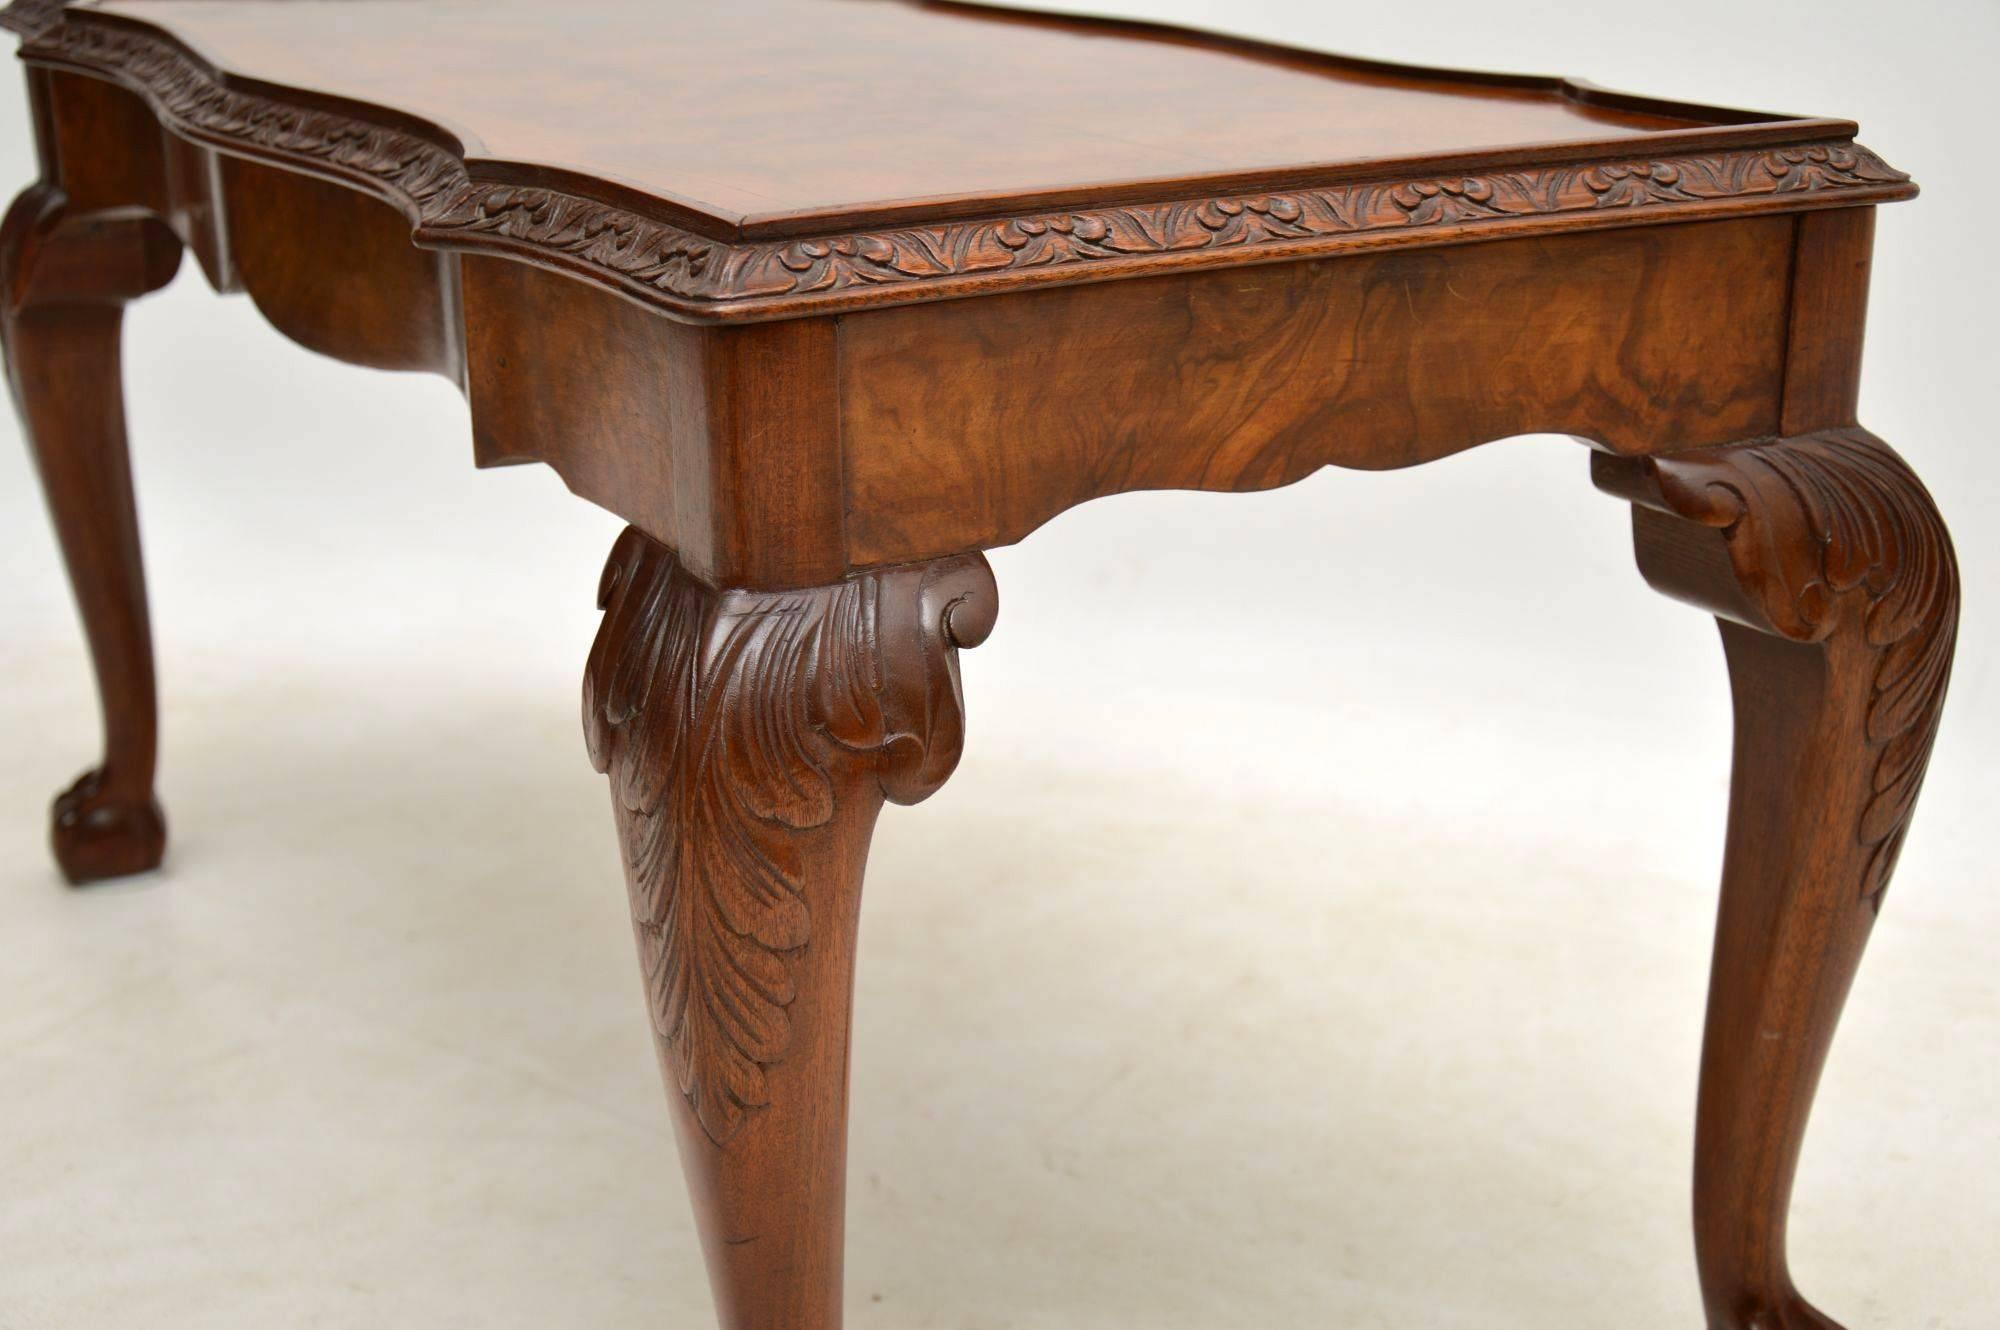 English Antique Burr Walnut Queen Anne Style Coffee Table